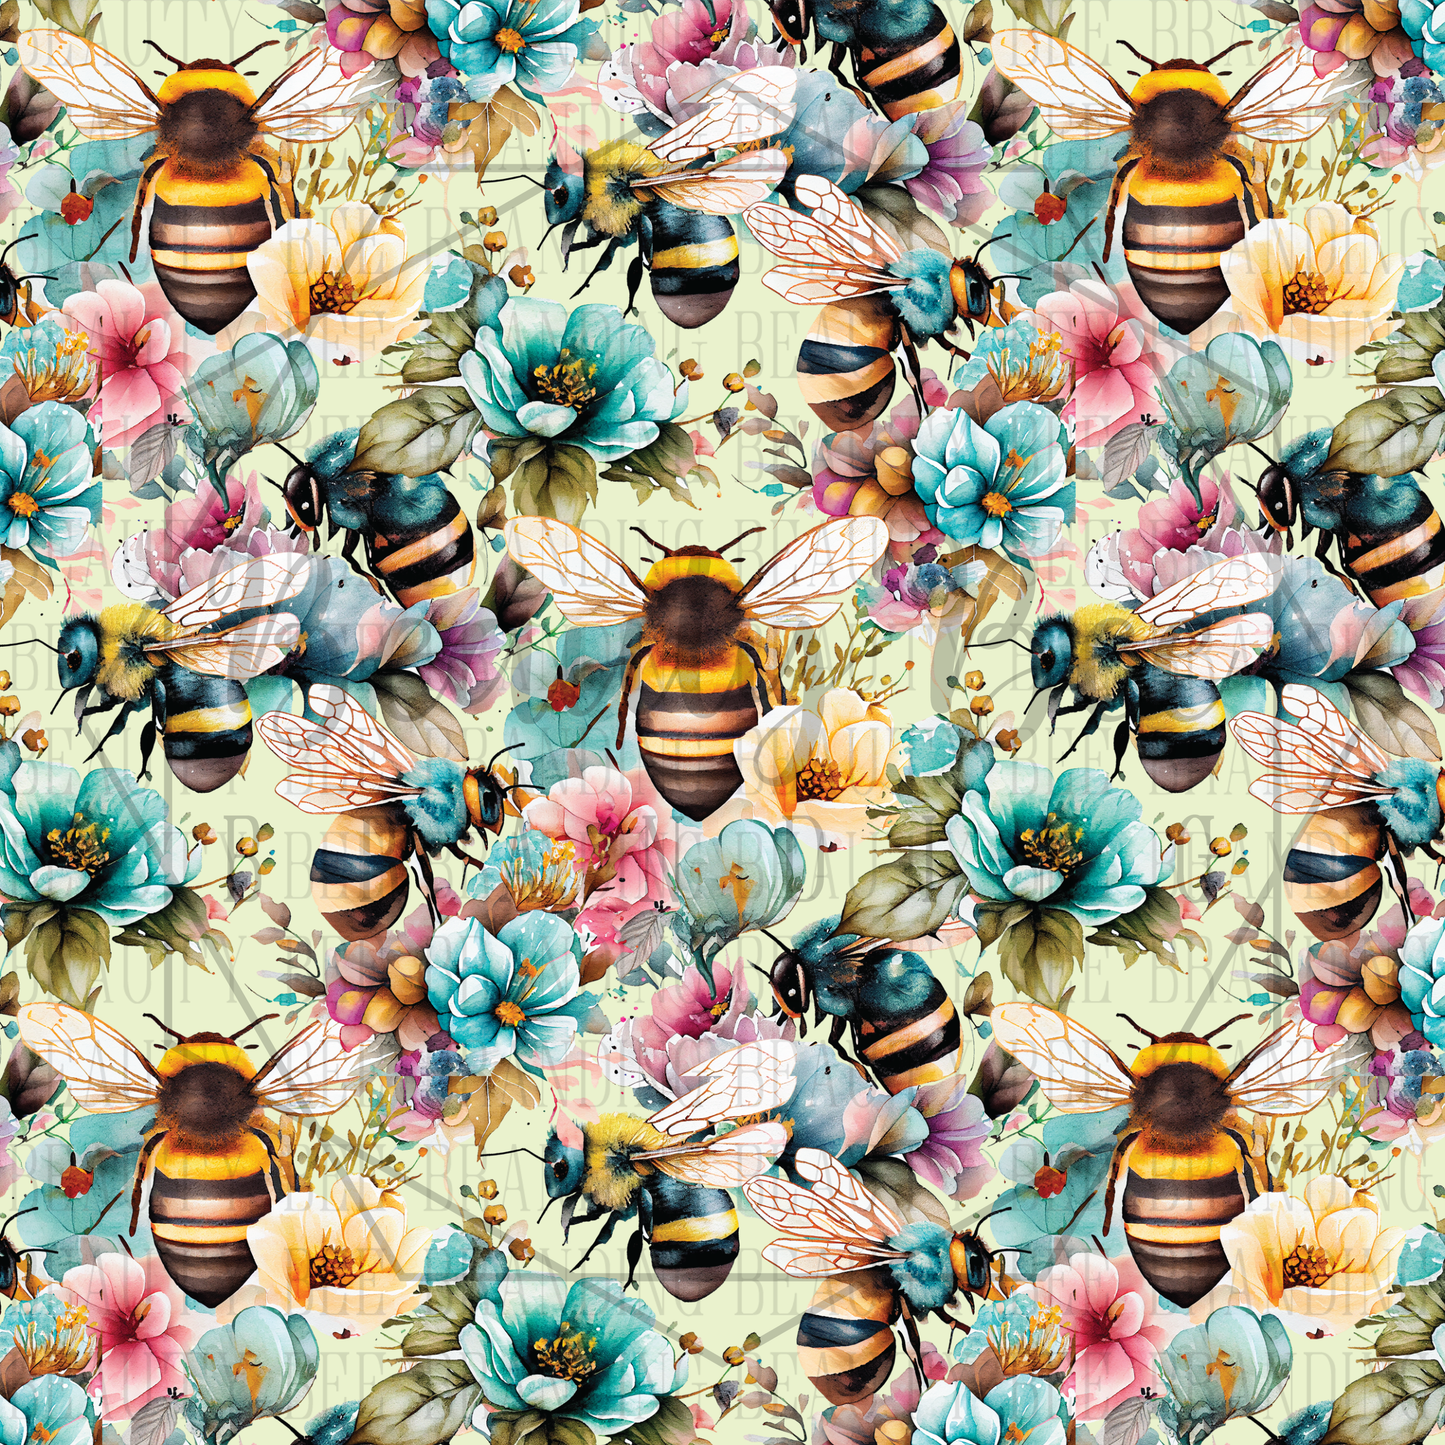 Floral Spring Bees SEAMLESS PATTERN